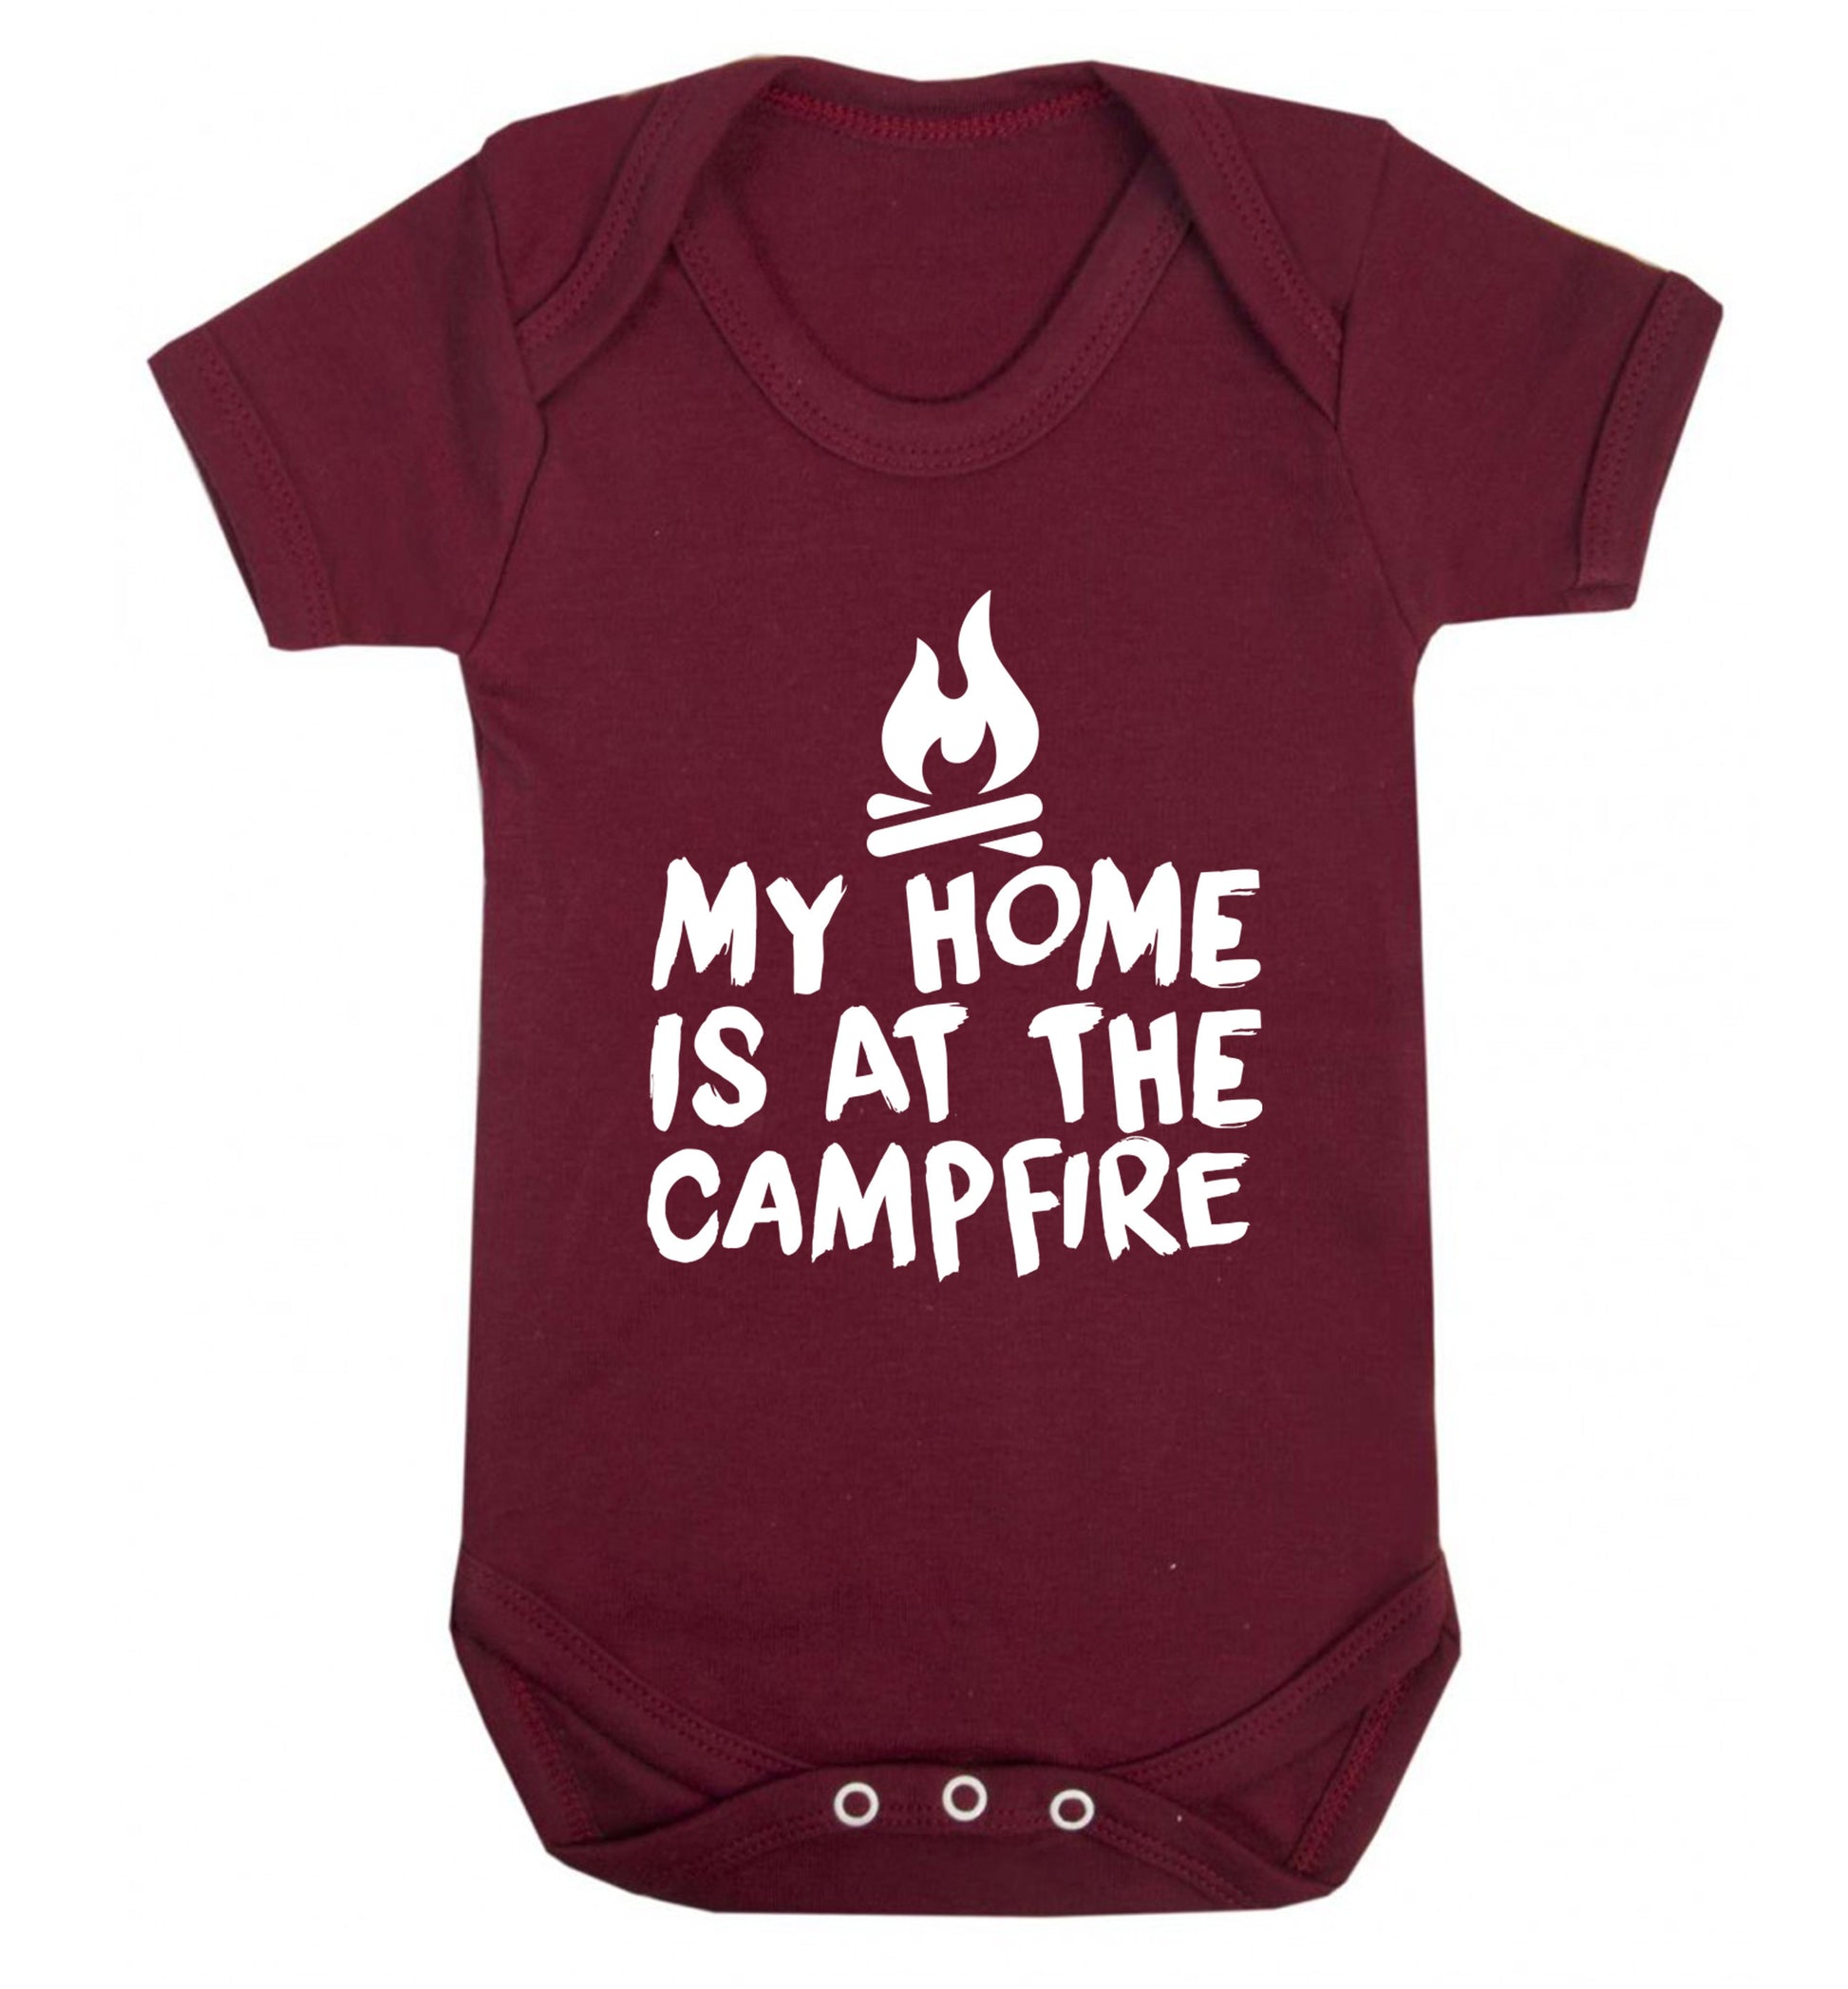 My home is at the campfire Baby Vest maroon 18-24 months